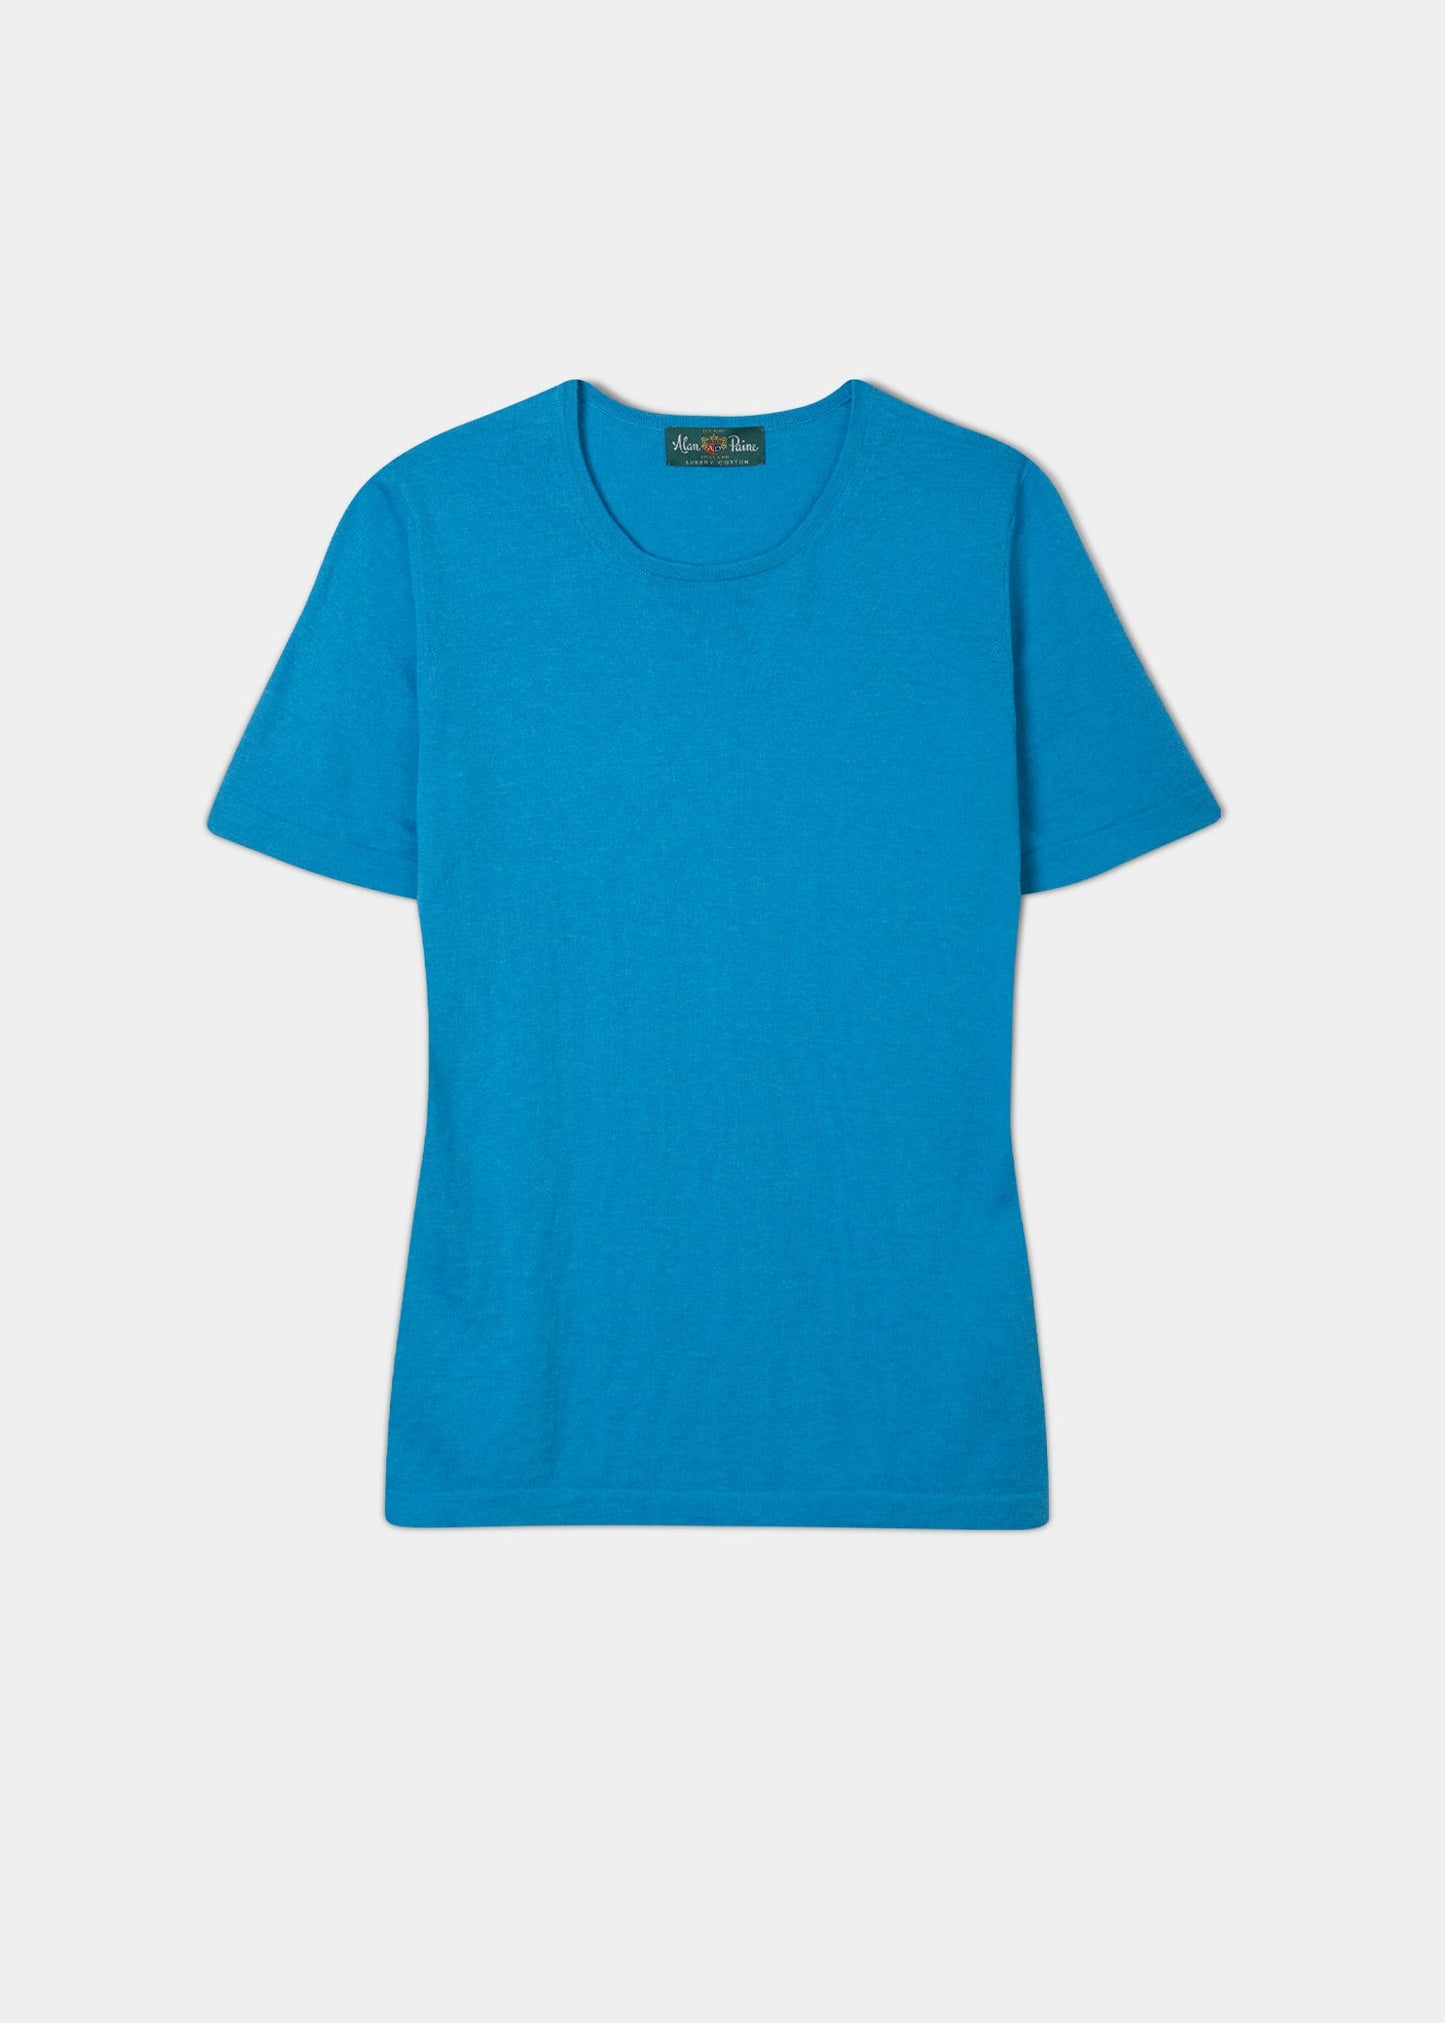 Ladies cotton cashmere short sleeved t-shirt in colourway sand